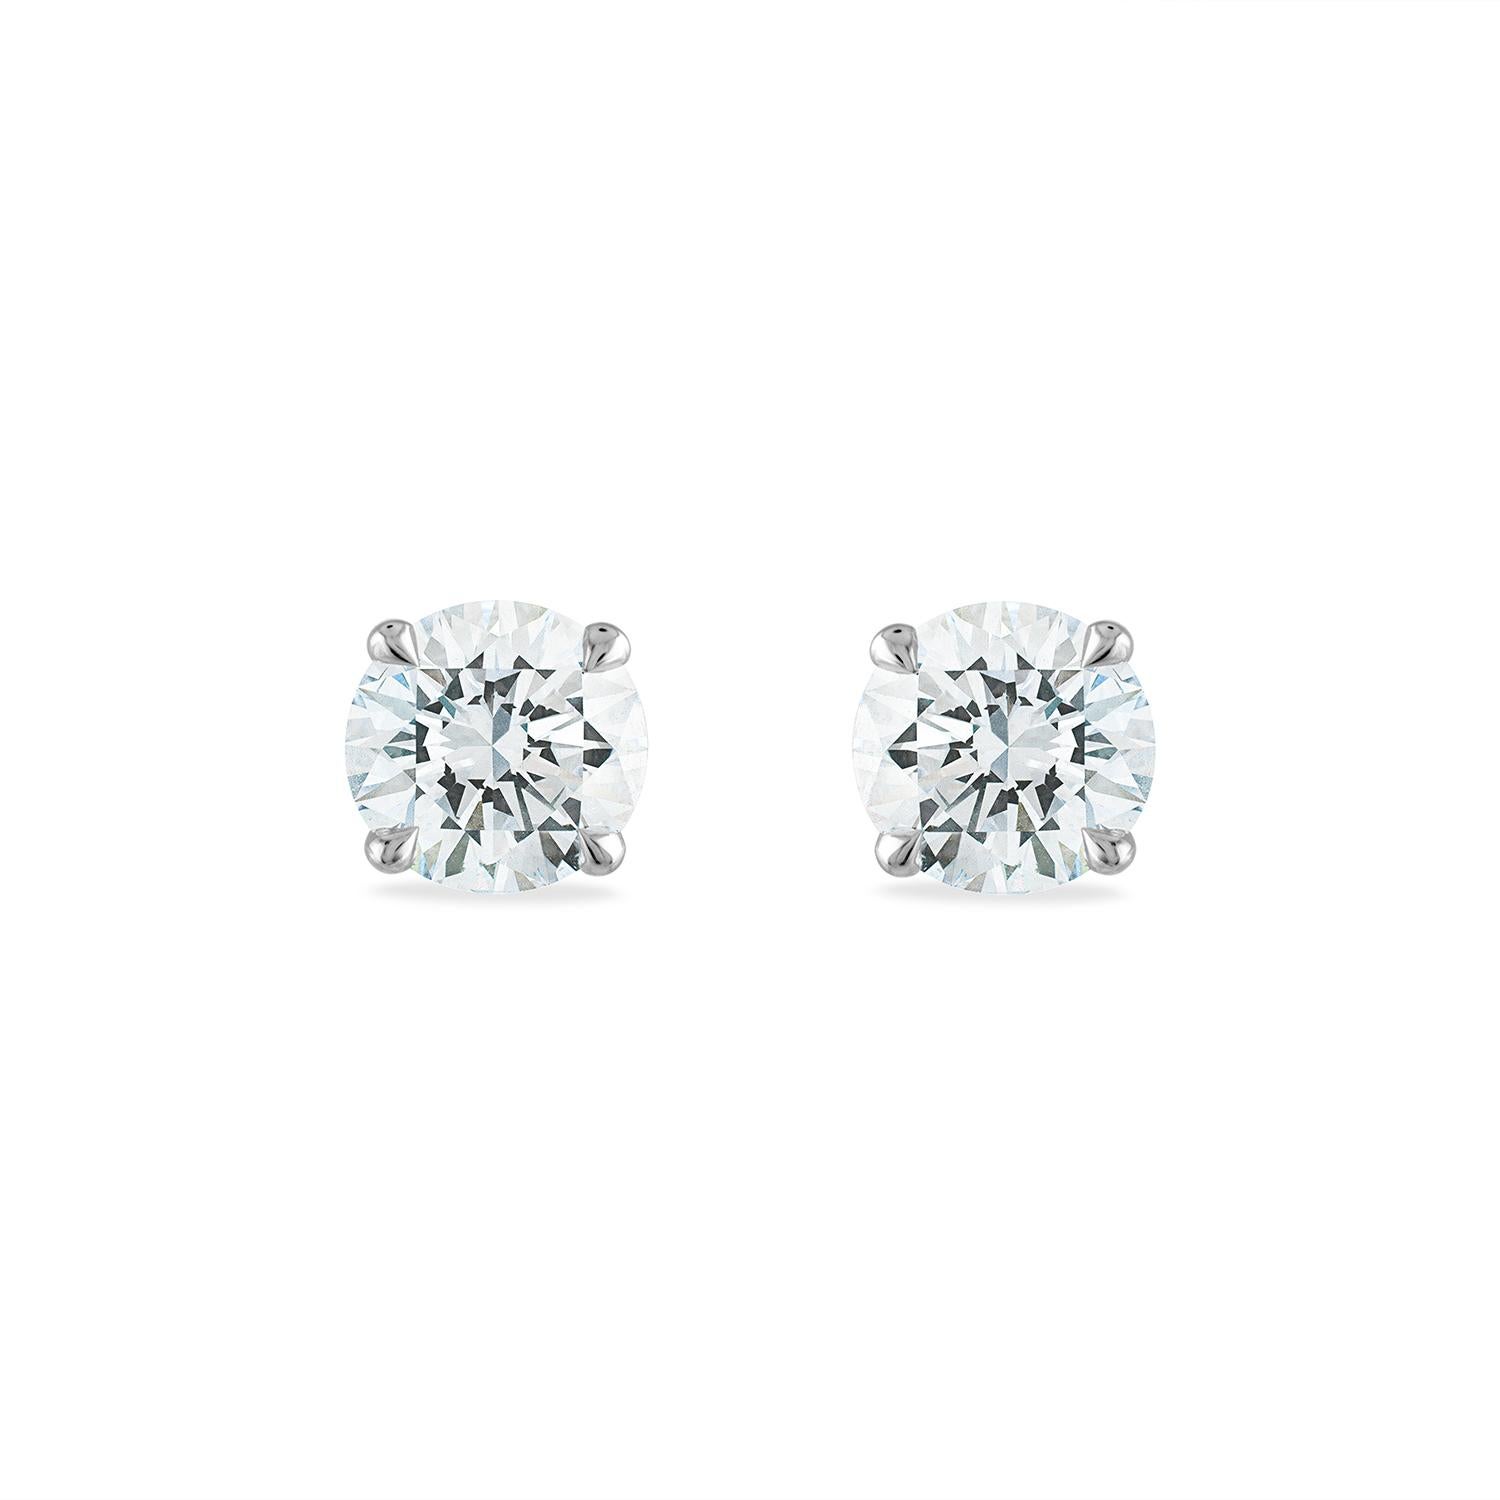 2 Ct Total weight Diamond stud earrings.
Both diamonds are GIA Certified, I color, SI2 Clarity. 
Both stones are rated Excellent Cut, Excellent Polish, and Excellent Symmetry - the highest possible score within the GIA grading evaluation. 

Set in